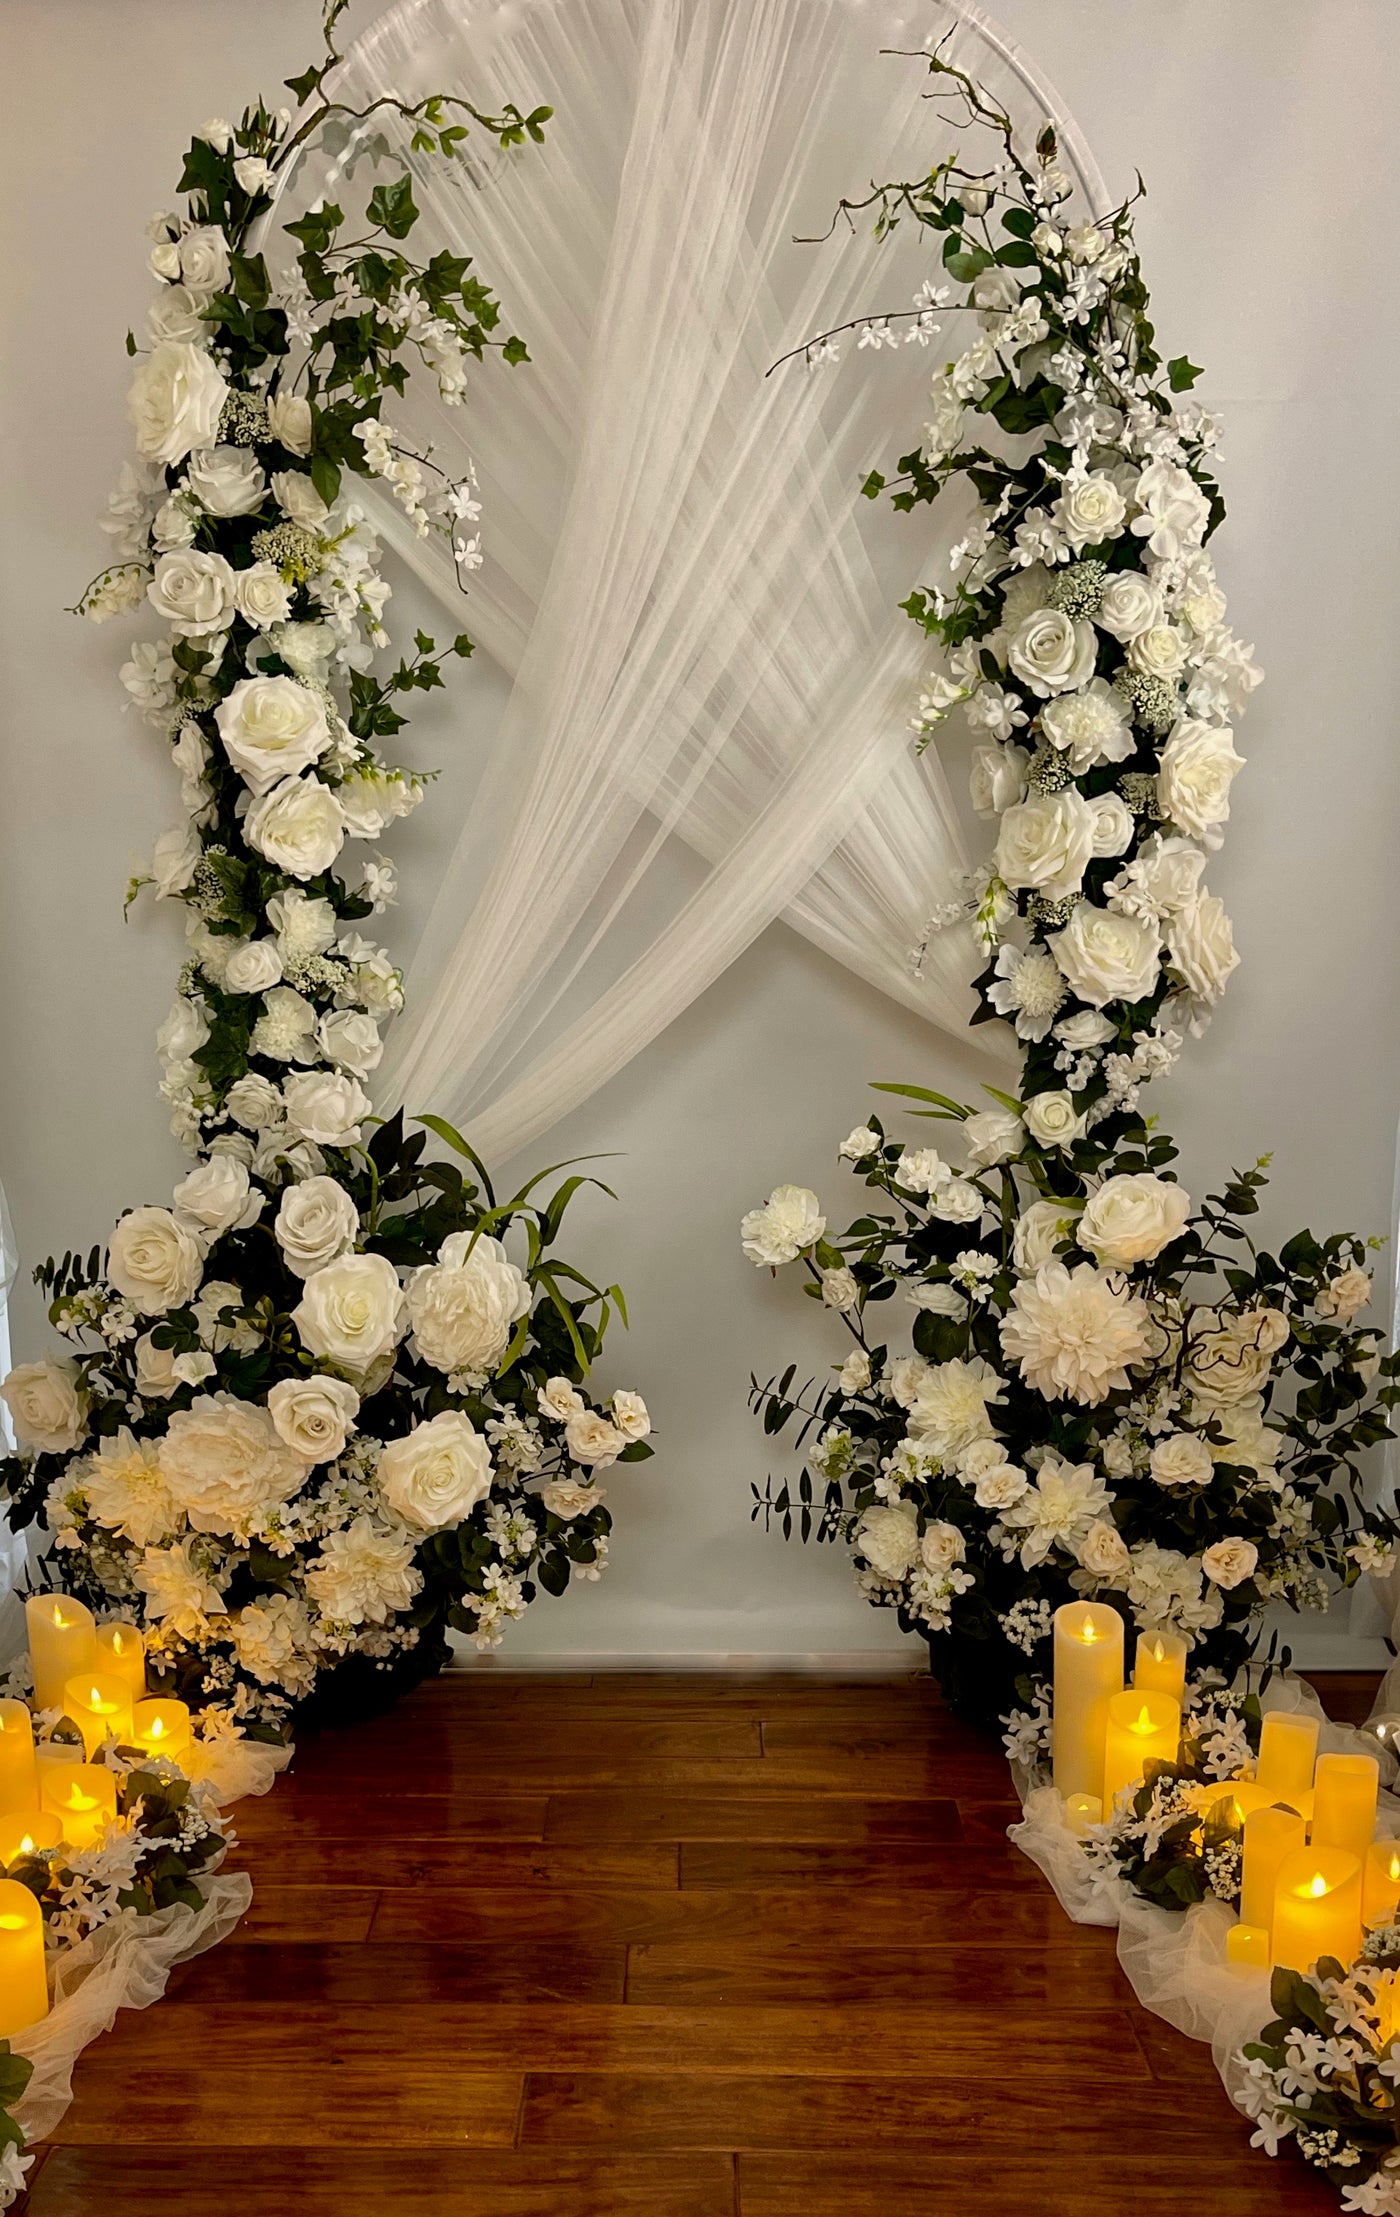 Create the perfect dreamy atmosphere for your wedding by incorporating these crisp white florals into your decor nuptials. There are five separate pieces to this wedding arch, and each piece can be rented separately. The total price to rent all five pieces is $525.00.